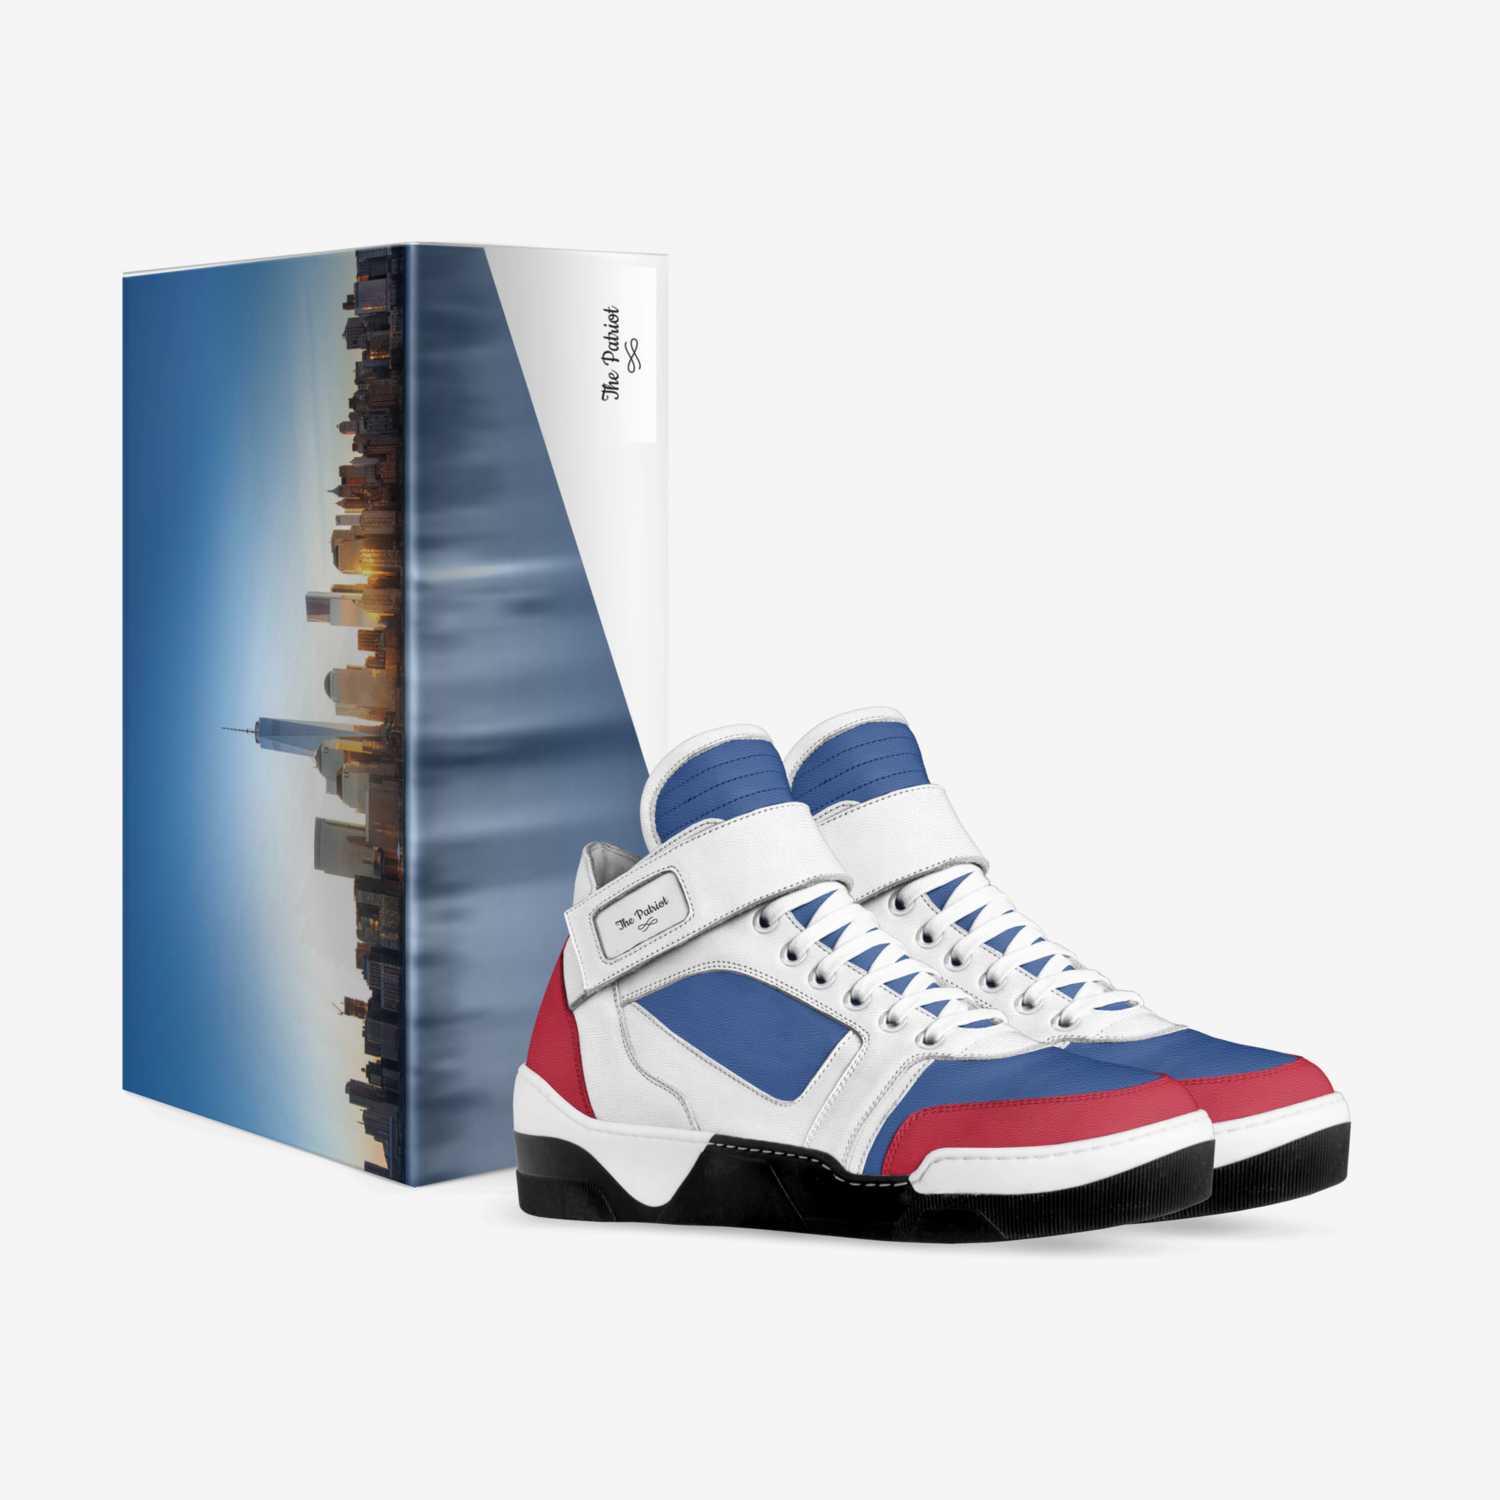 The Patriot | A Custom Shoe concept by Randall Rutledge